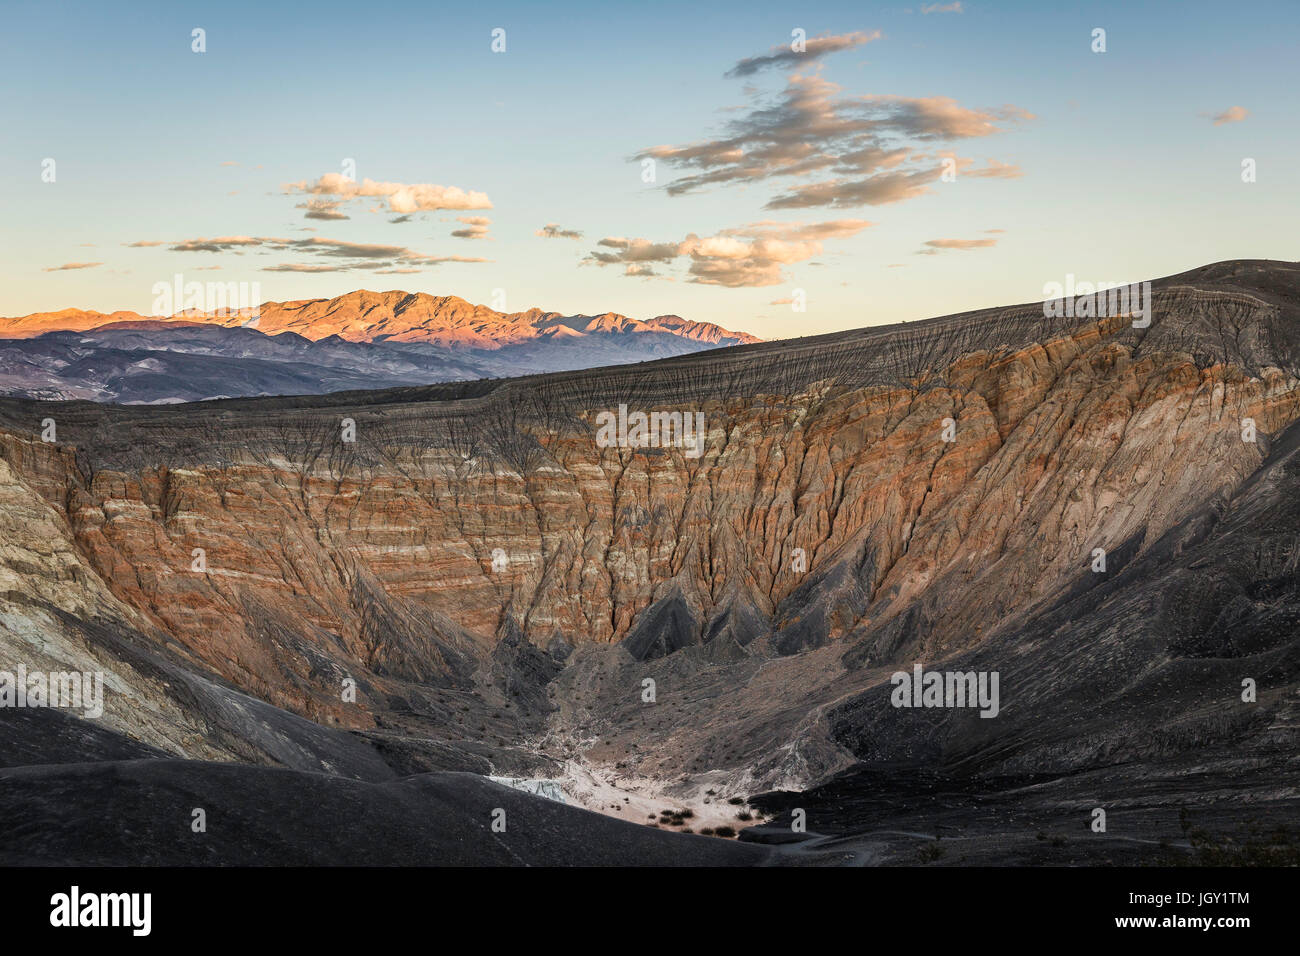 Landscape at Ubehebe Crater in Death Valley National Park, California, USA Stock Photo